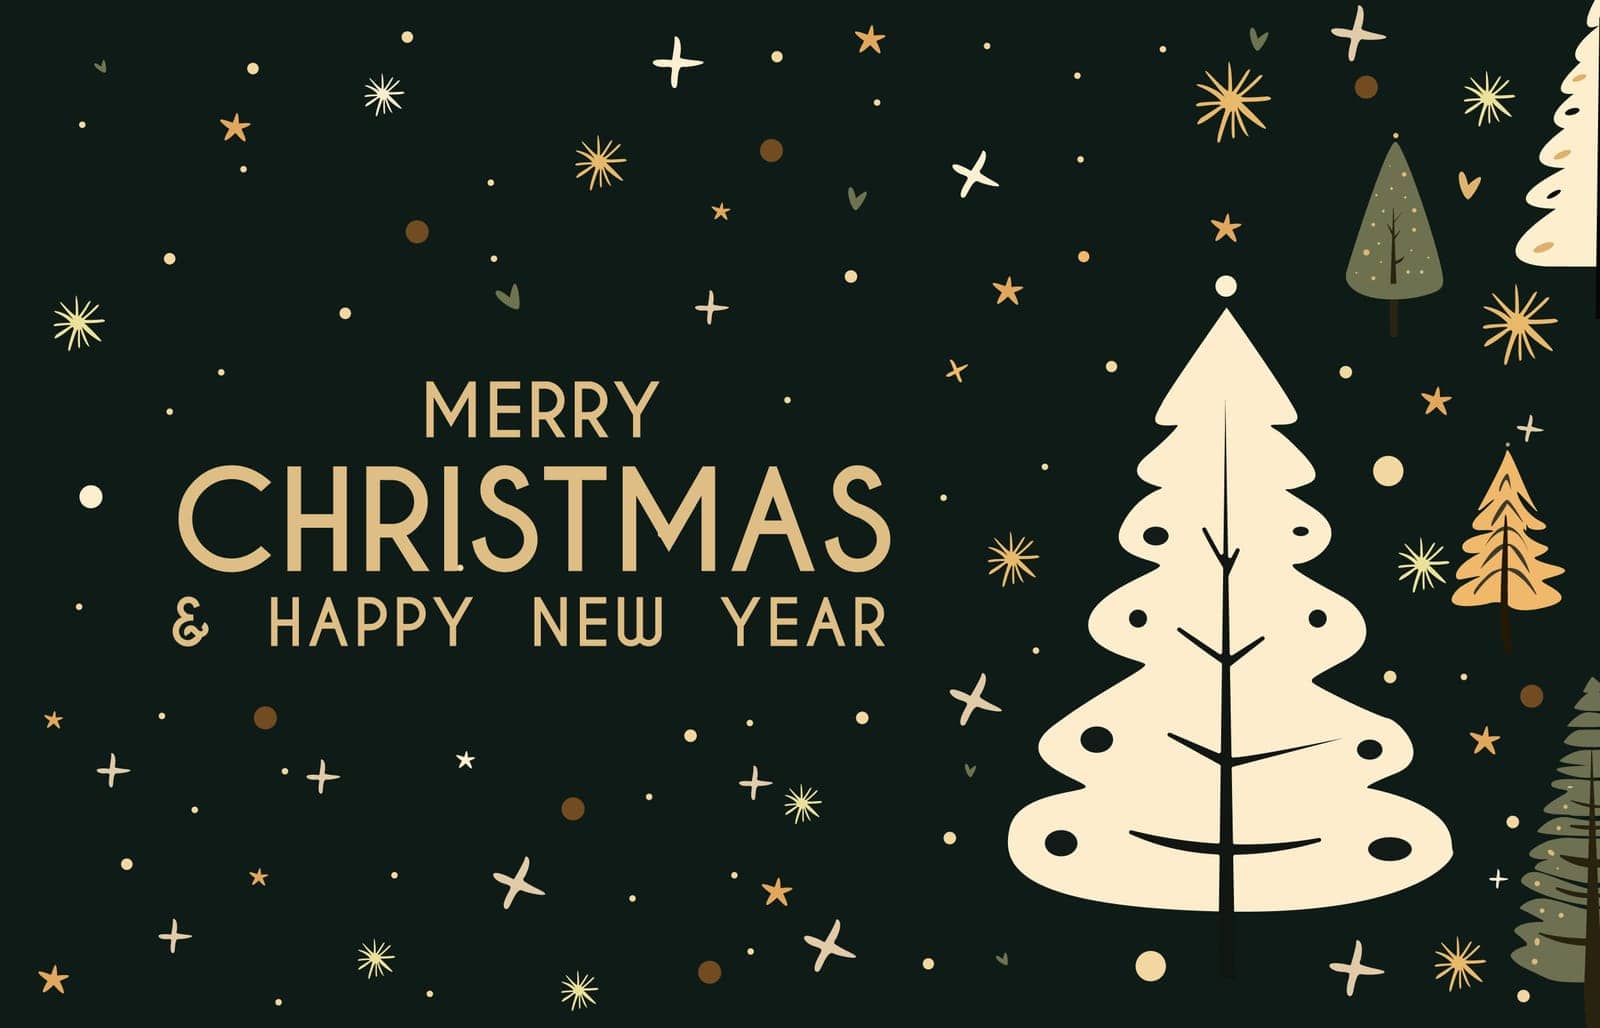 Holiday card for Christmas and New Year, decorated with New Year trees on a dark background. Vector